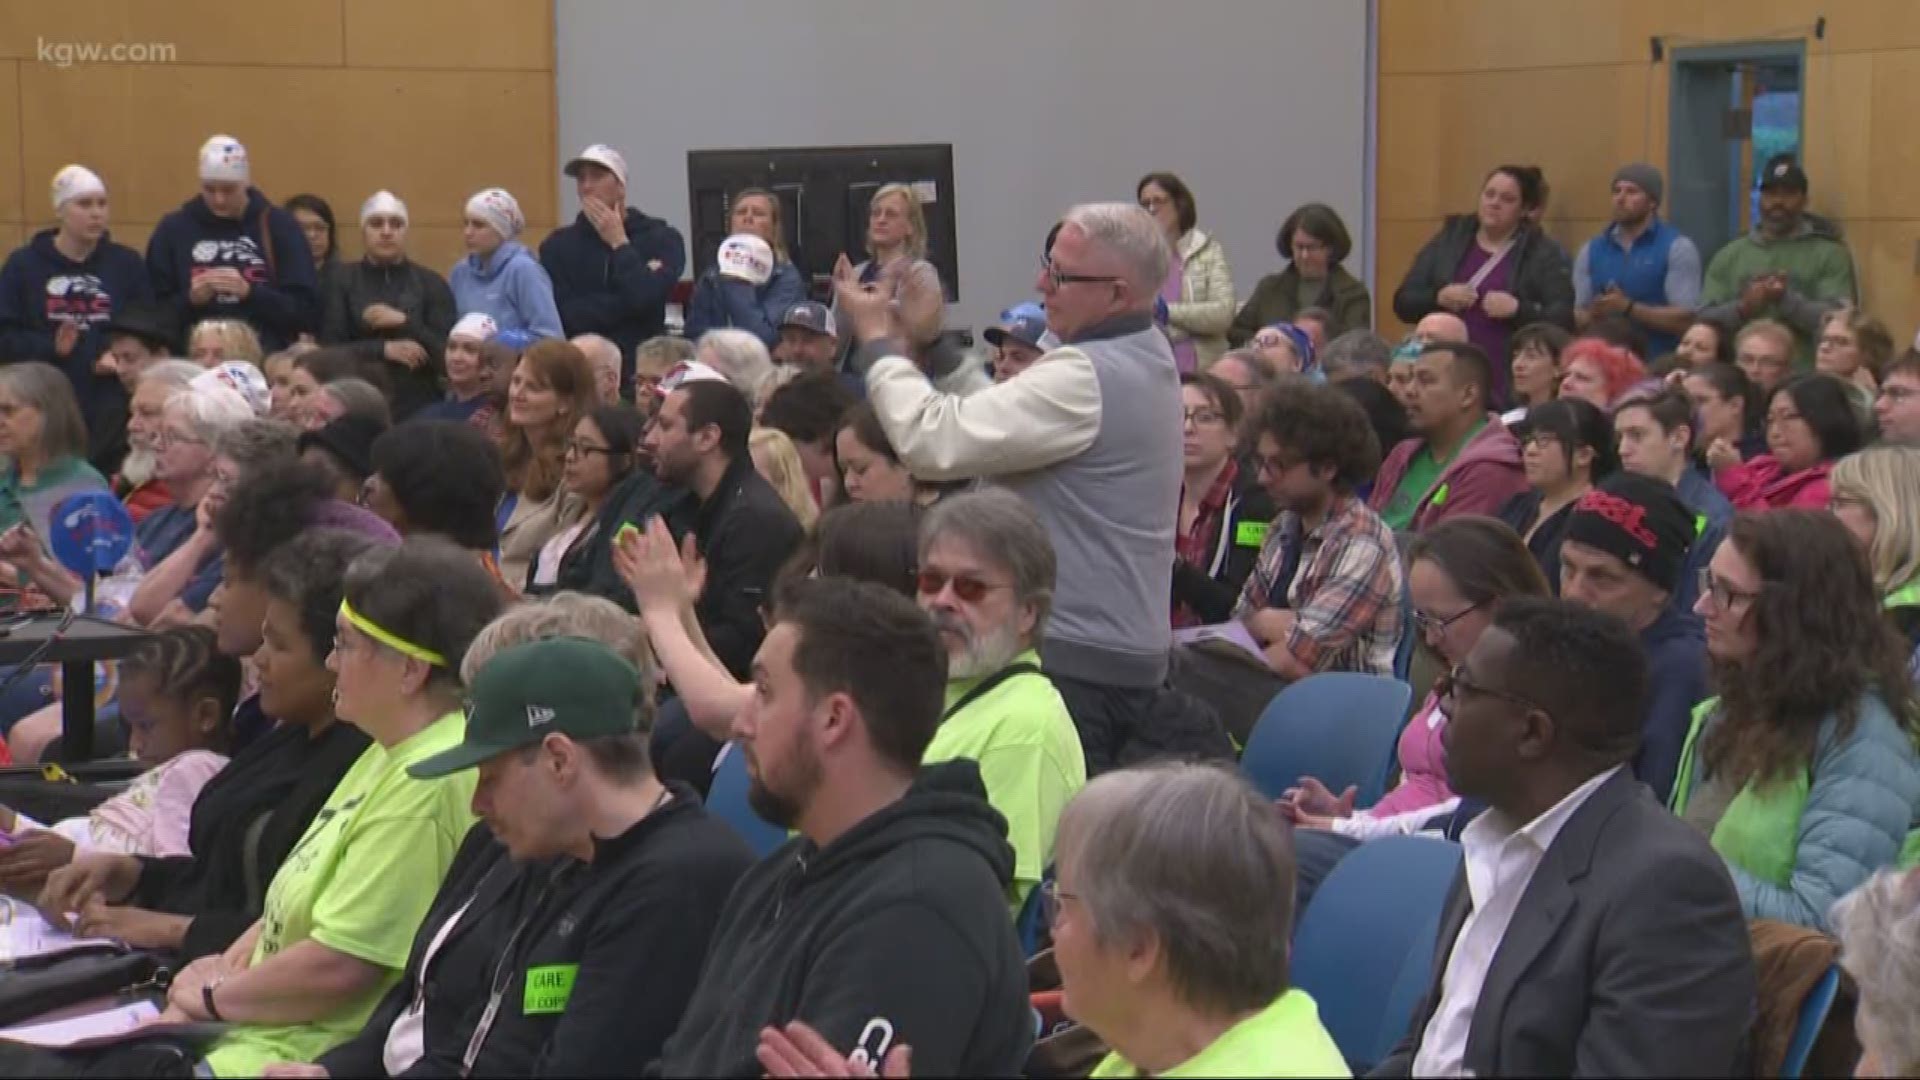 A large crowd shows up at community forum to voices opposition to proposed parks & rec budget.